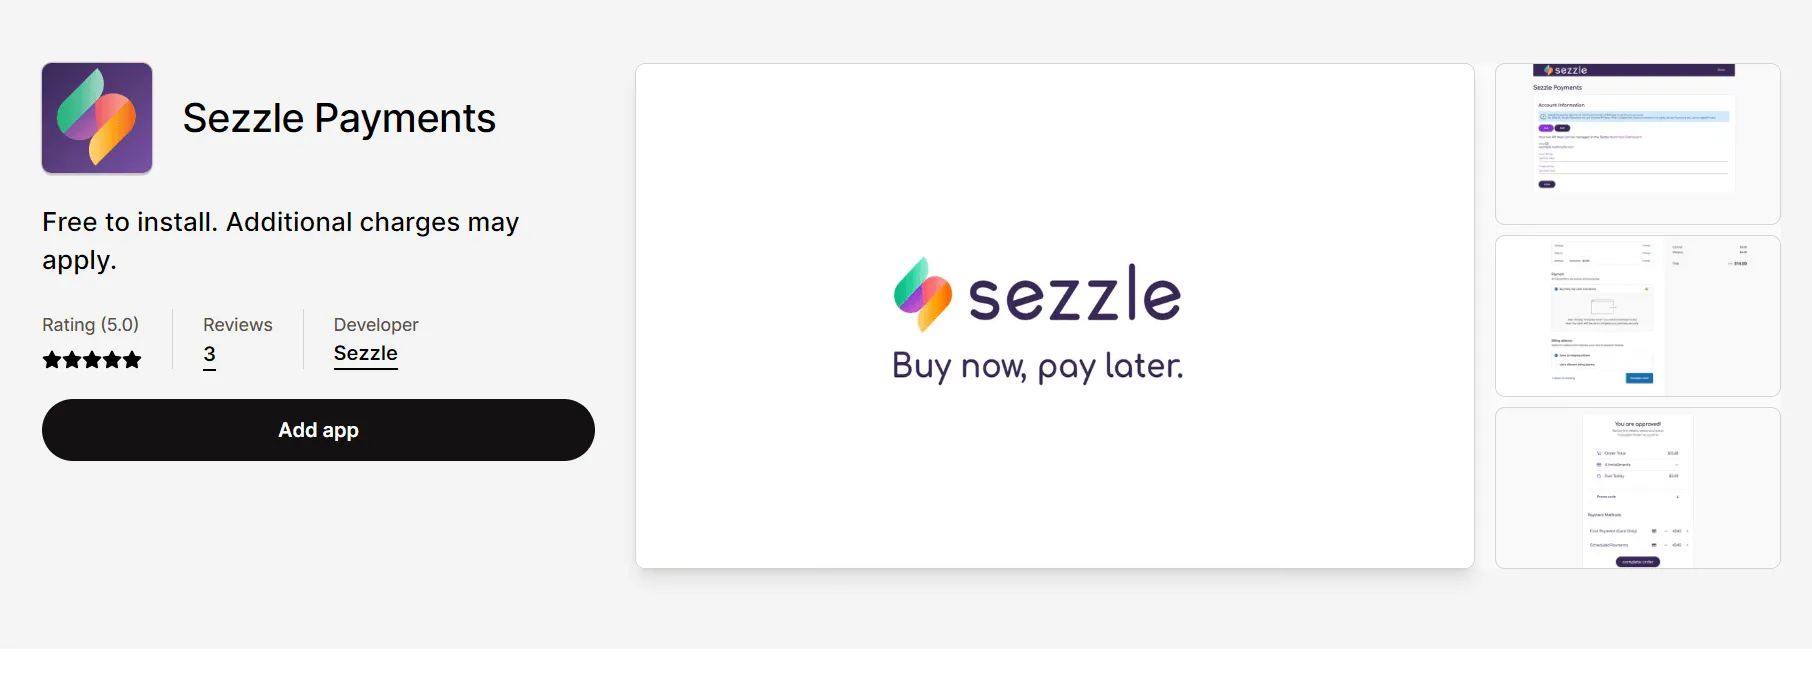 Adding Sezzle Payments to Shopify 